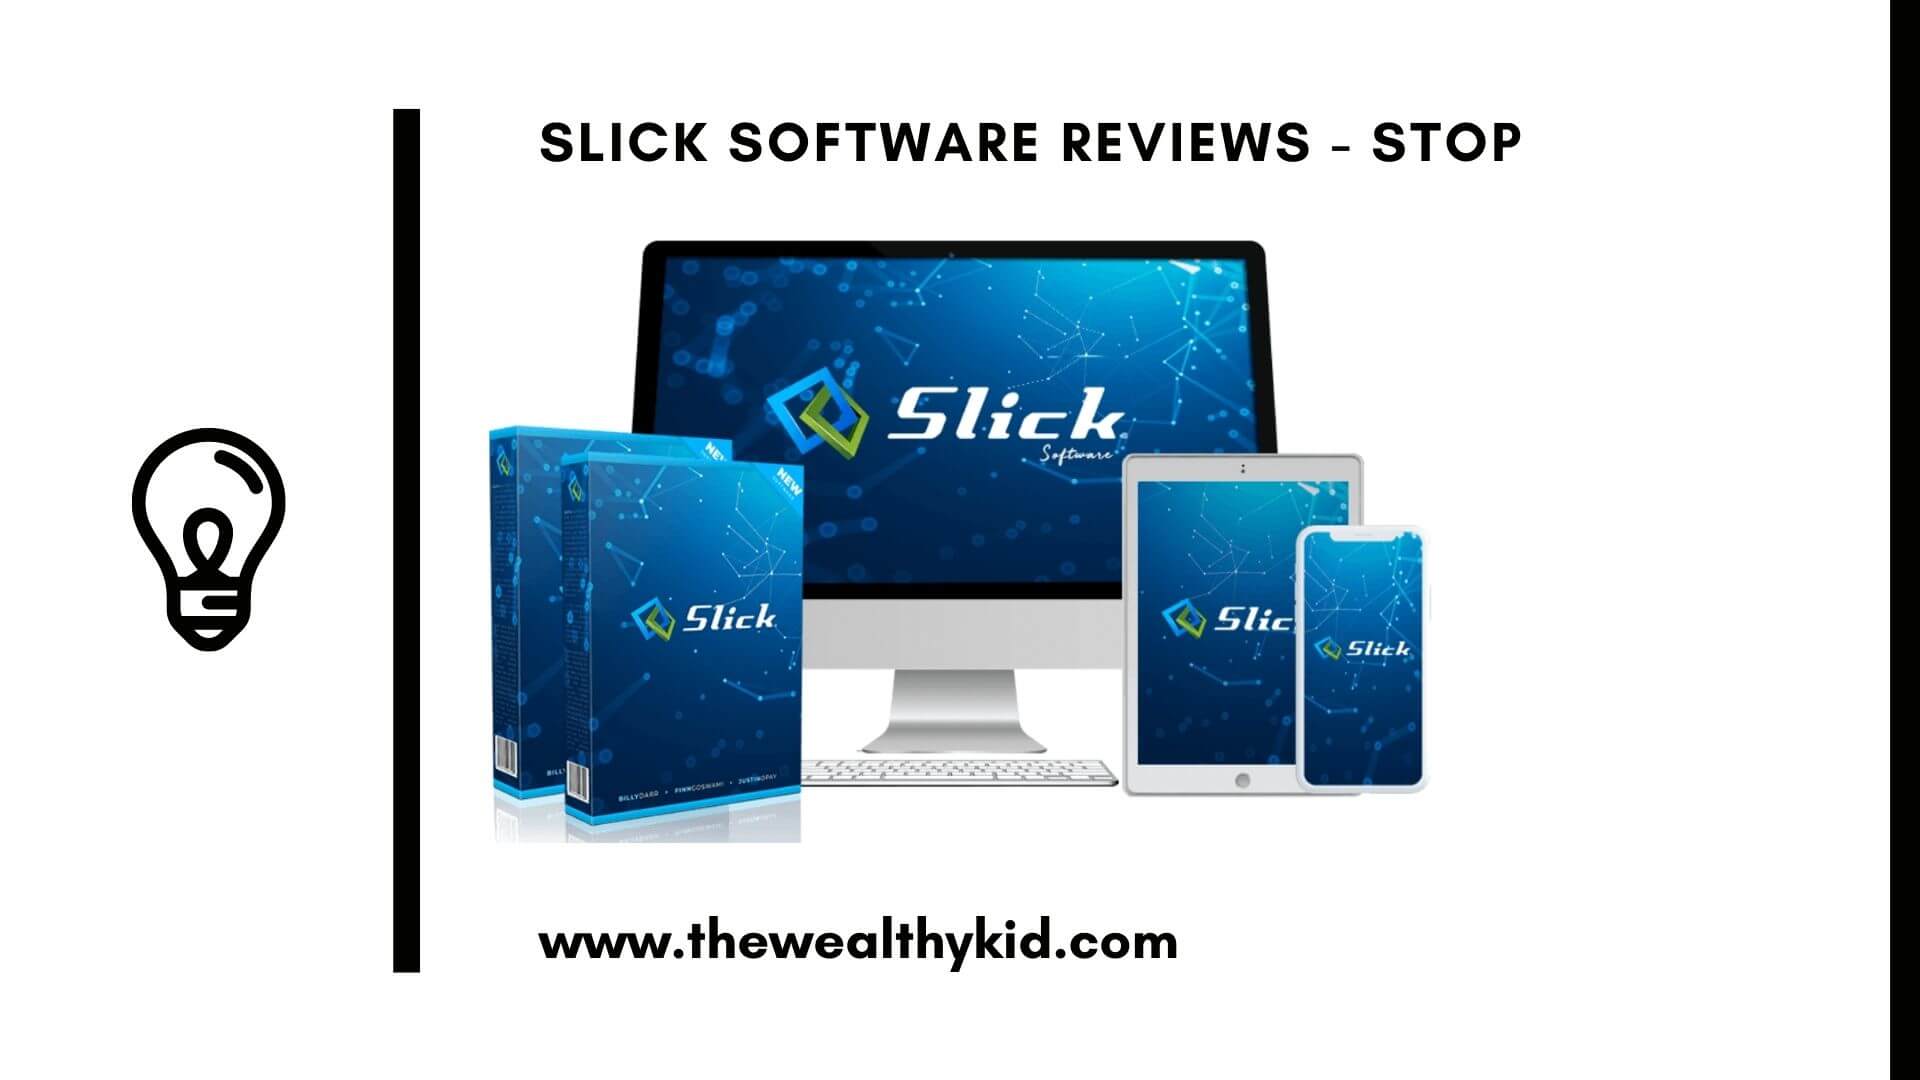 Slick Software Reviews – You Don’t Need It